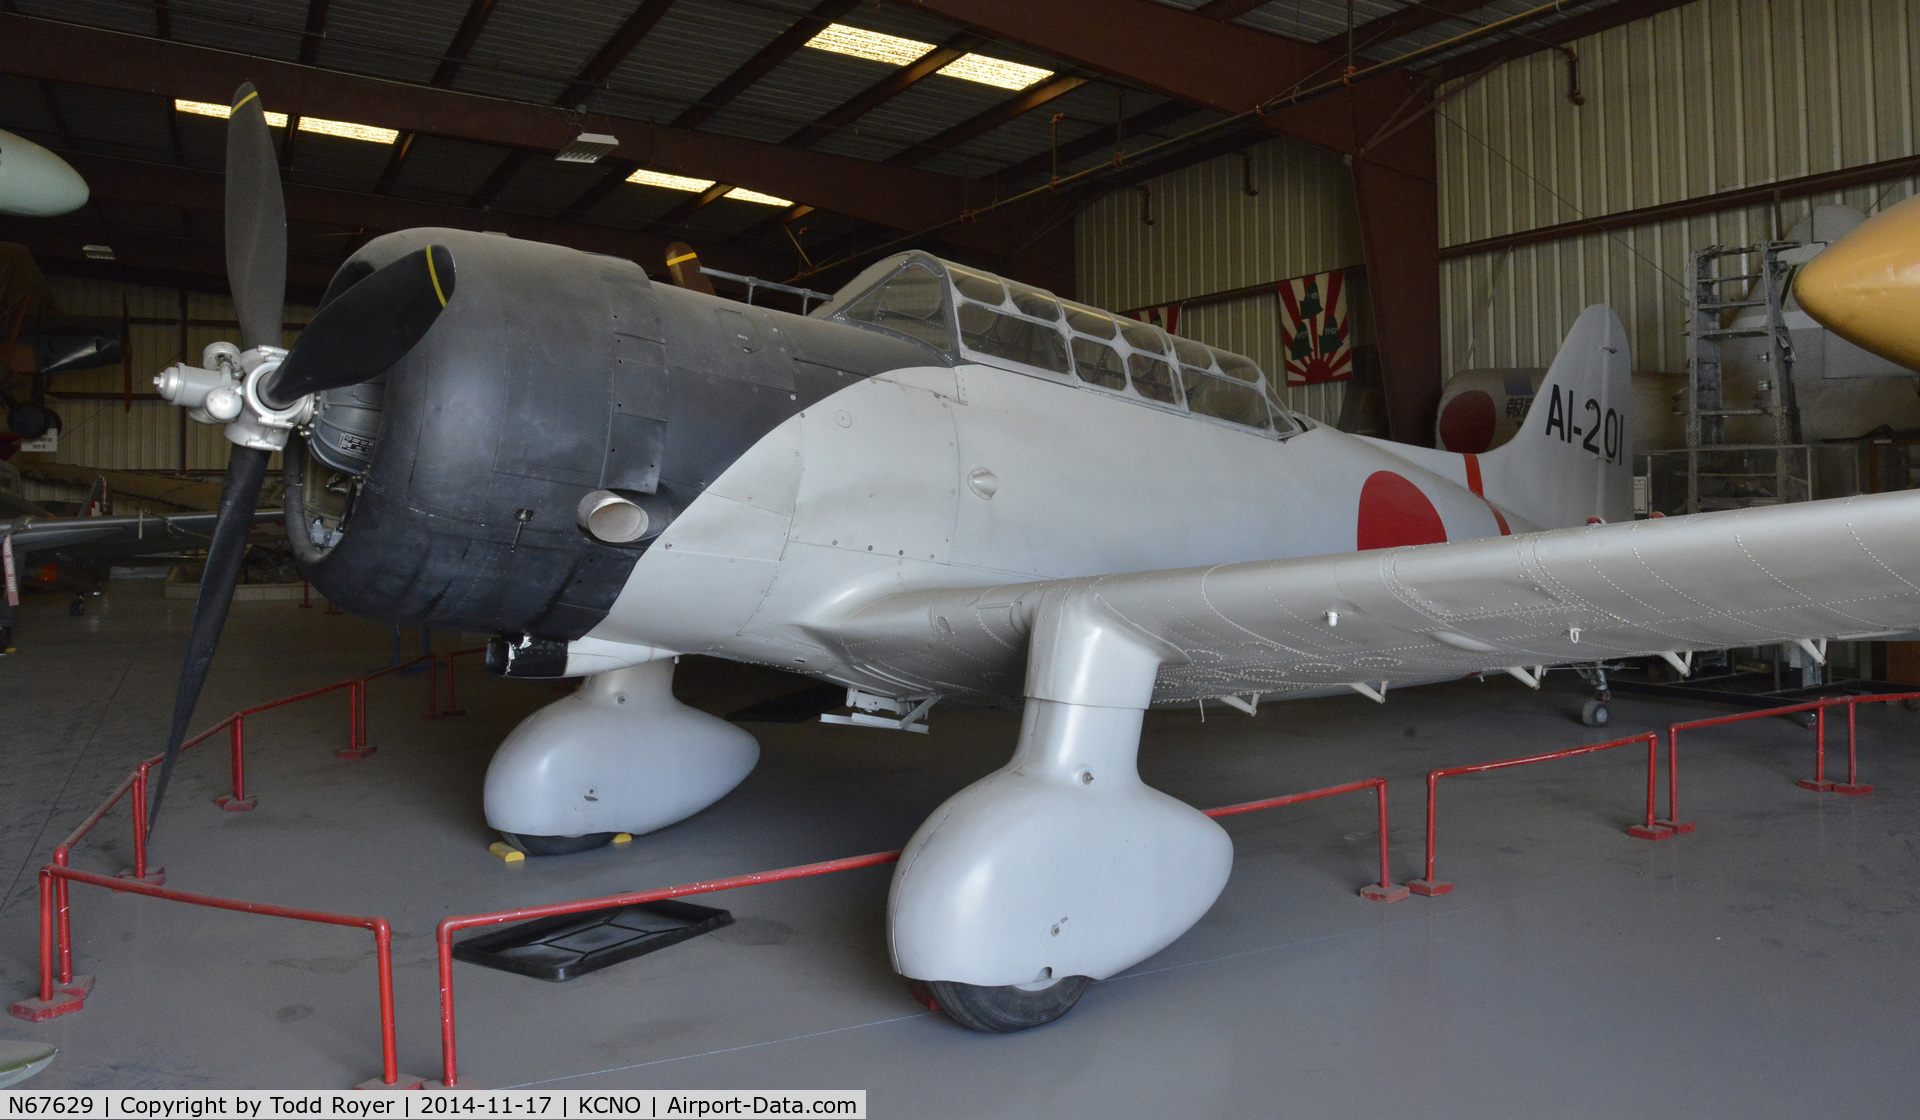 N67629, 1942 Convair BT-15 VAL C/N 11513, On display at the Planes of Fame Chino location